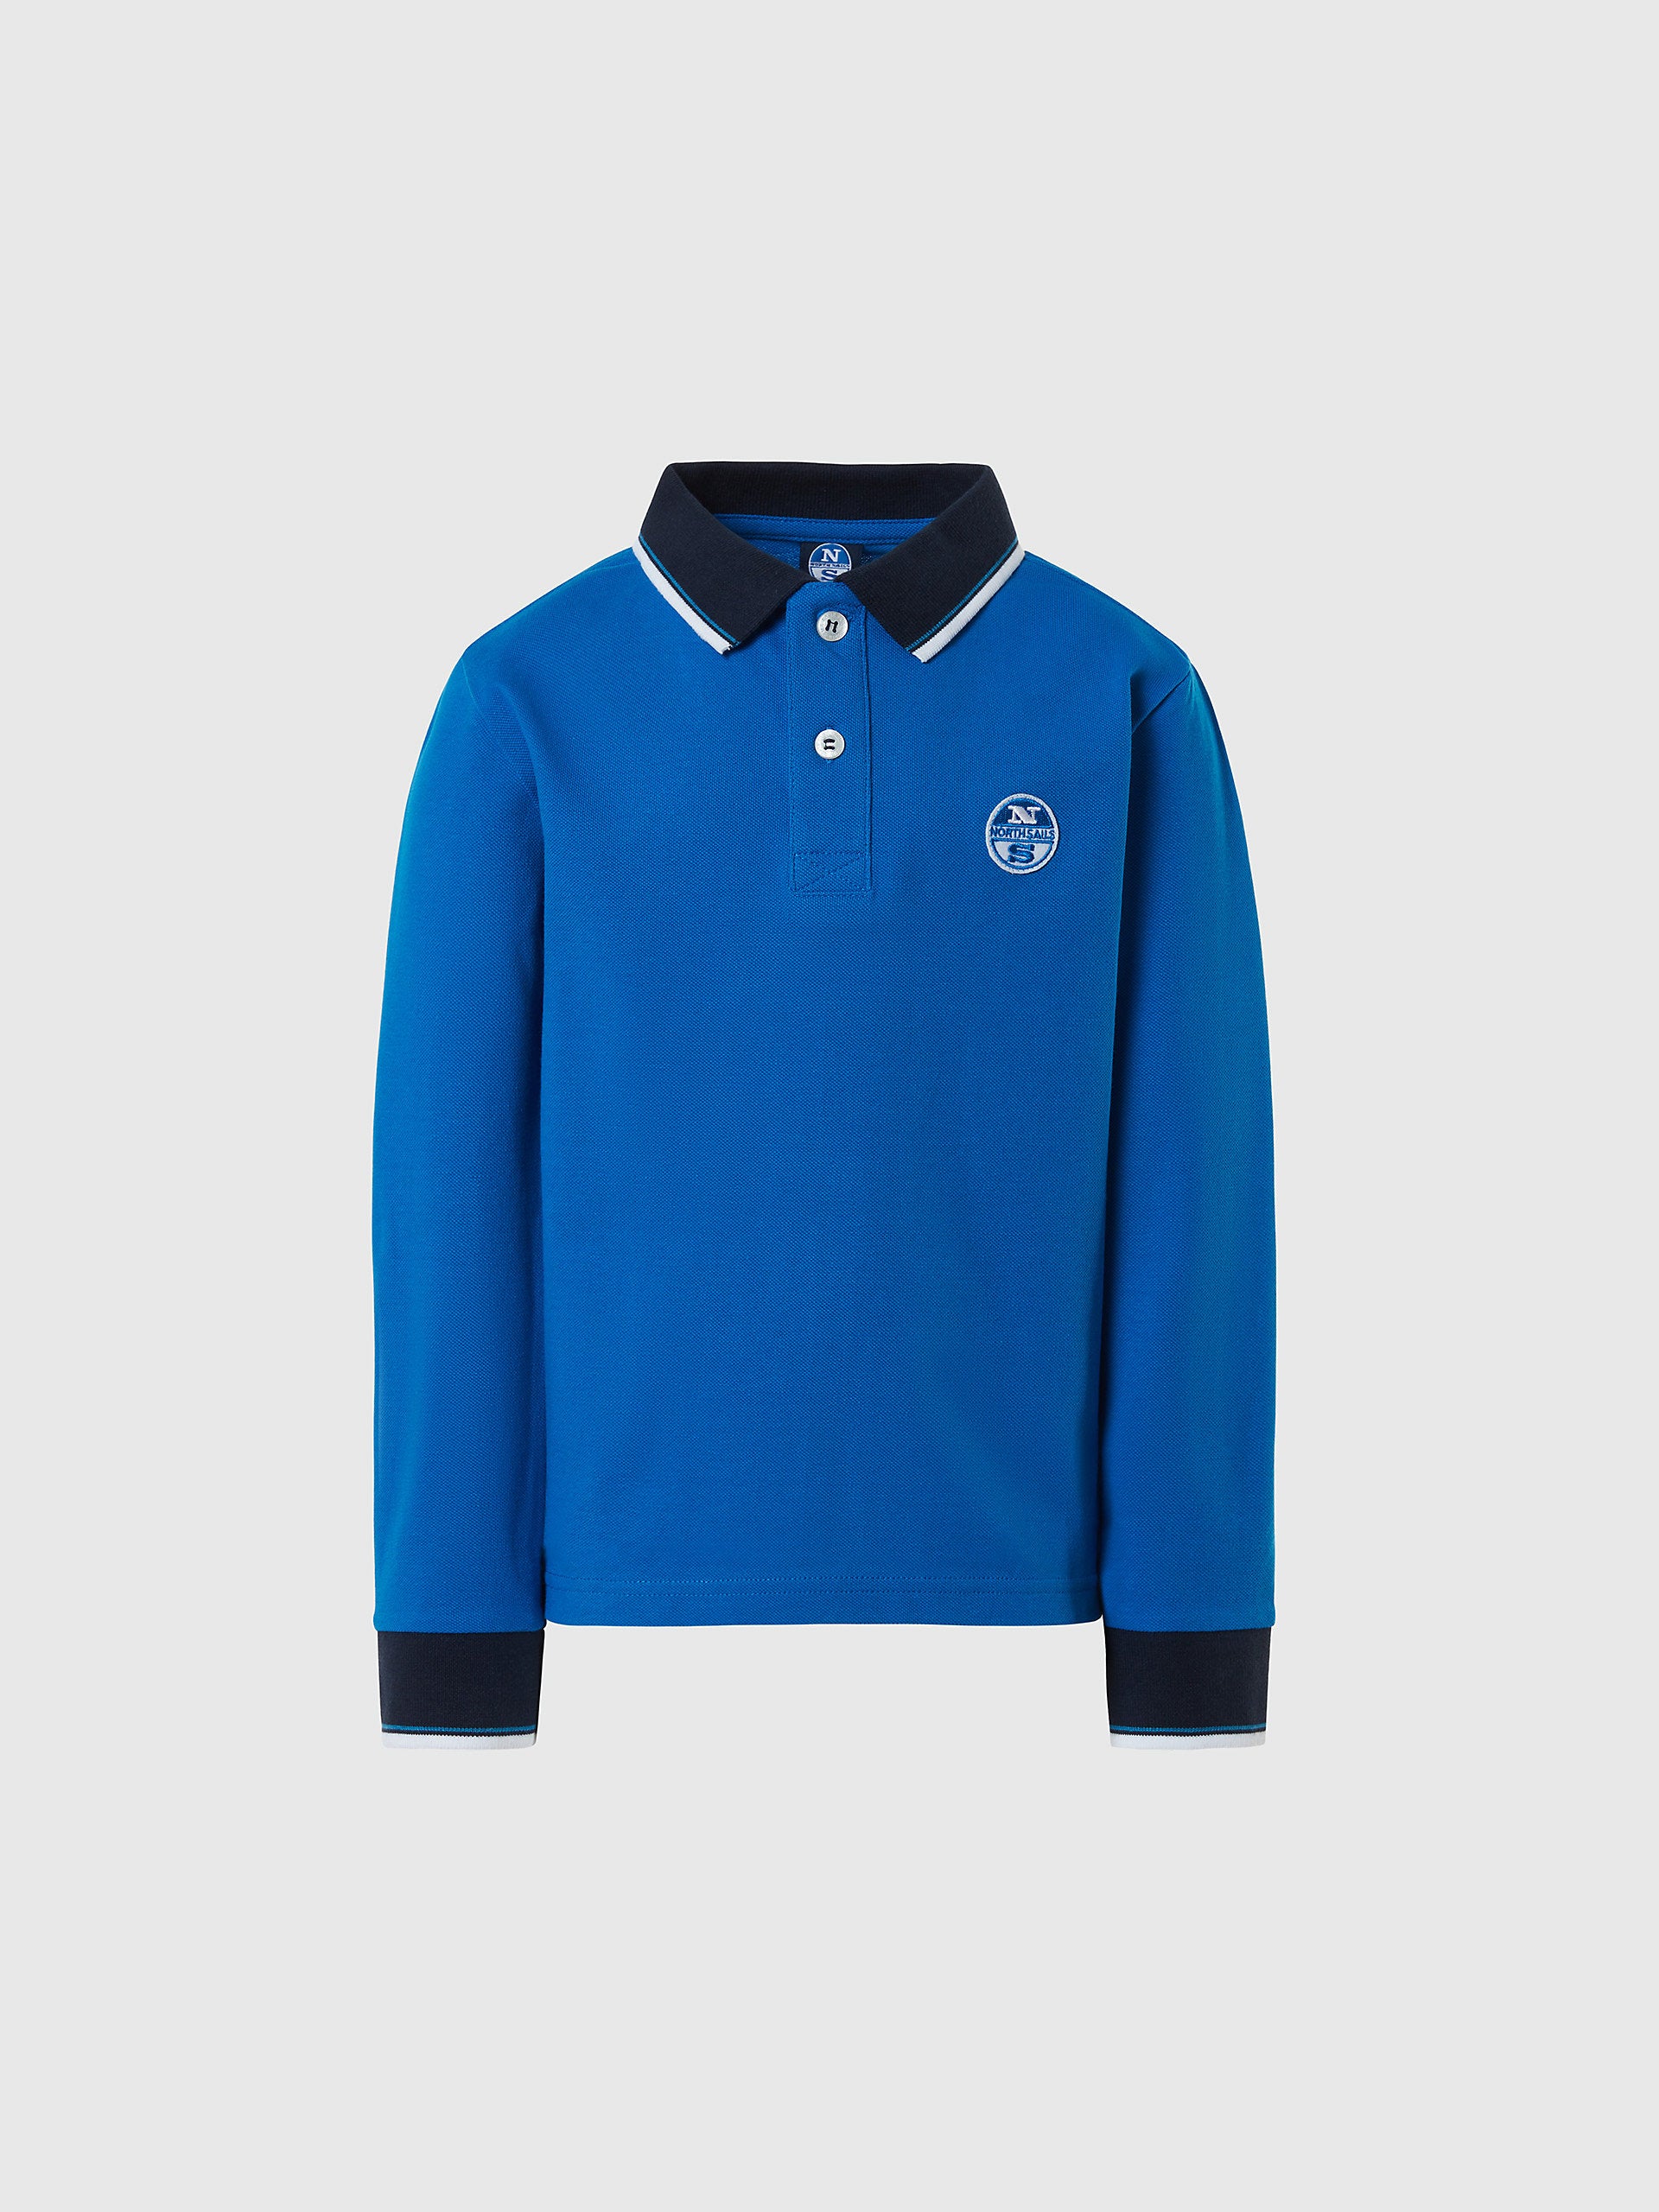 North Sails - Long-sleeved polo shirtNorth SailsImperial blue12